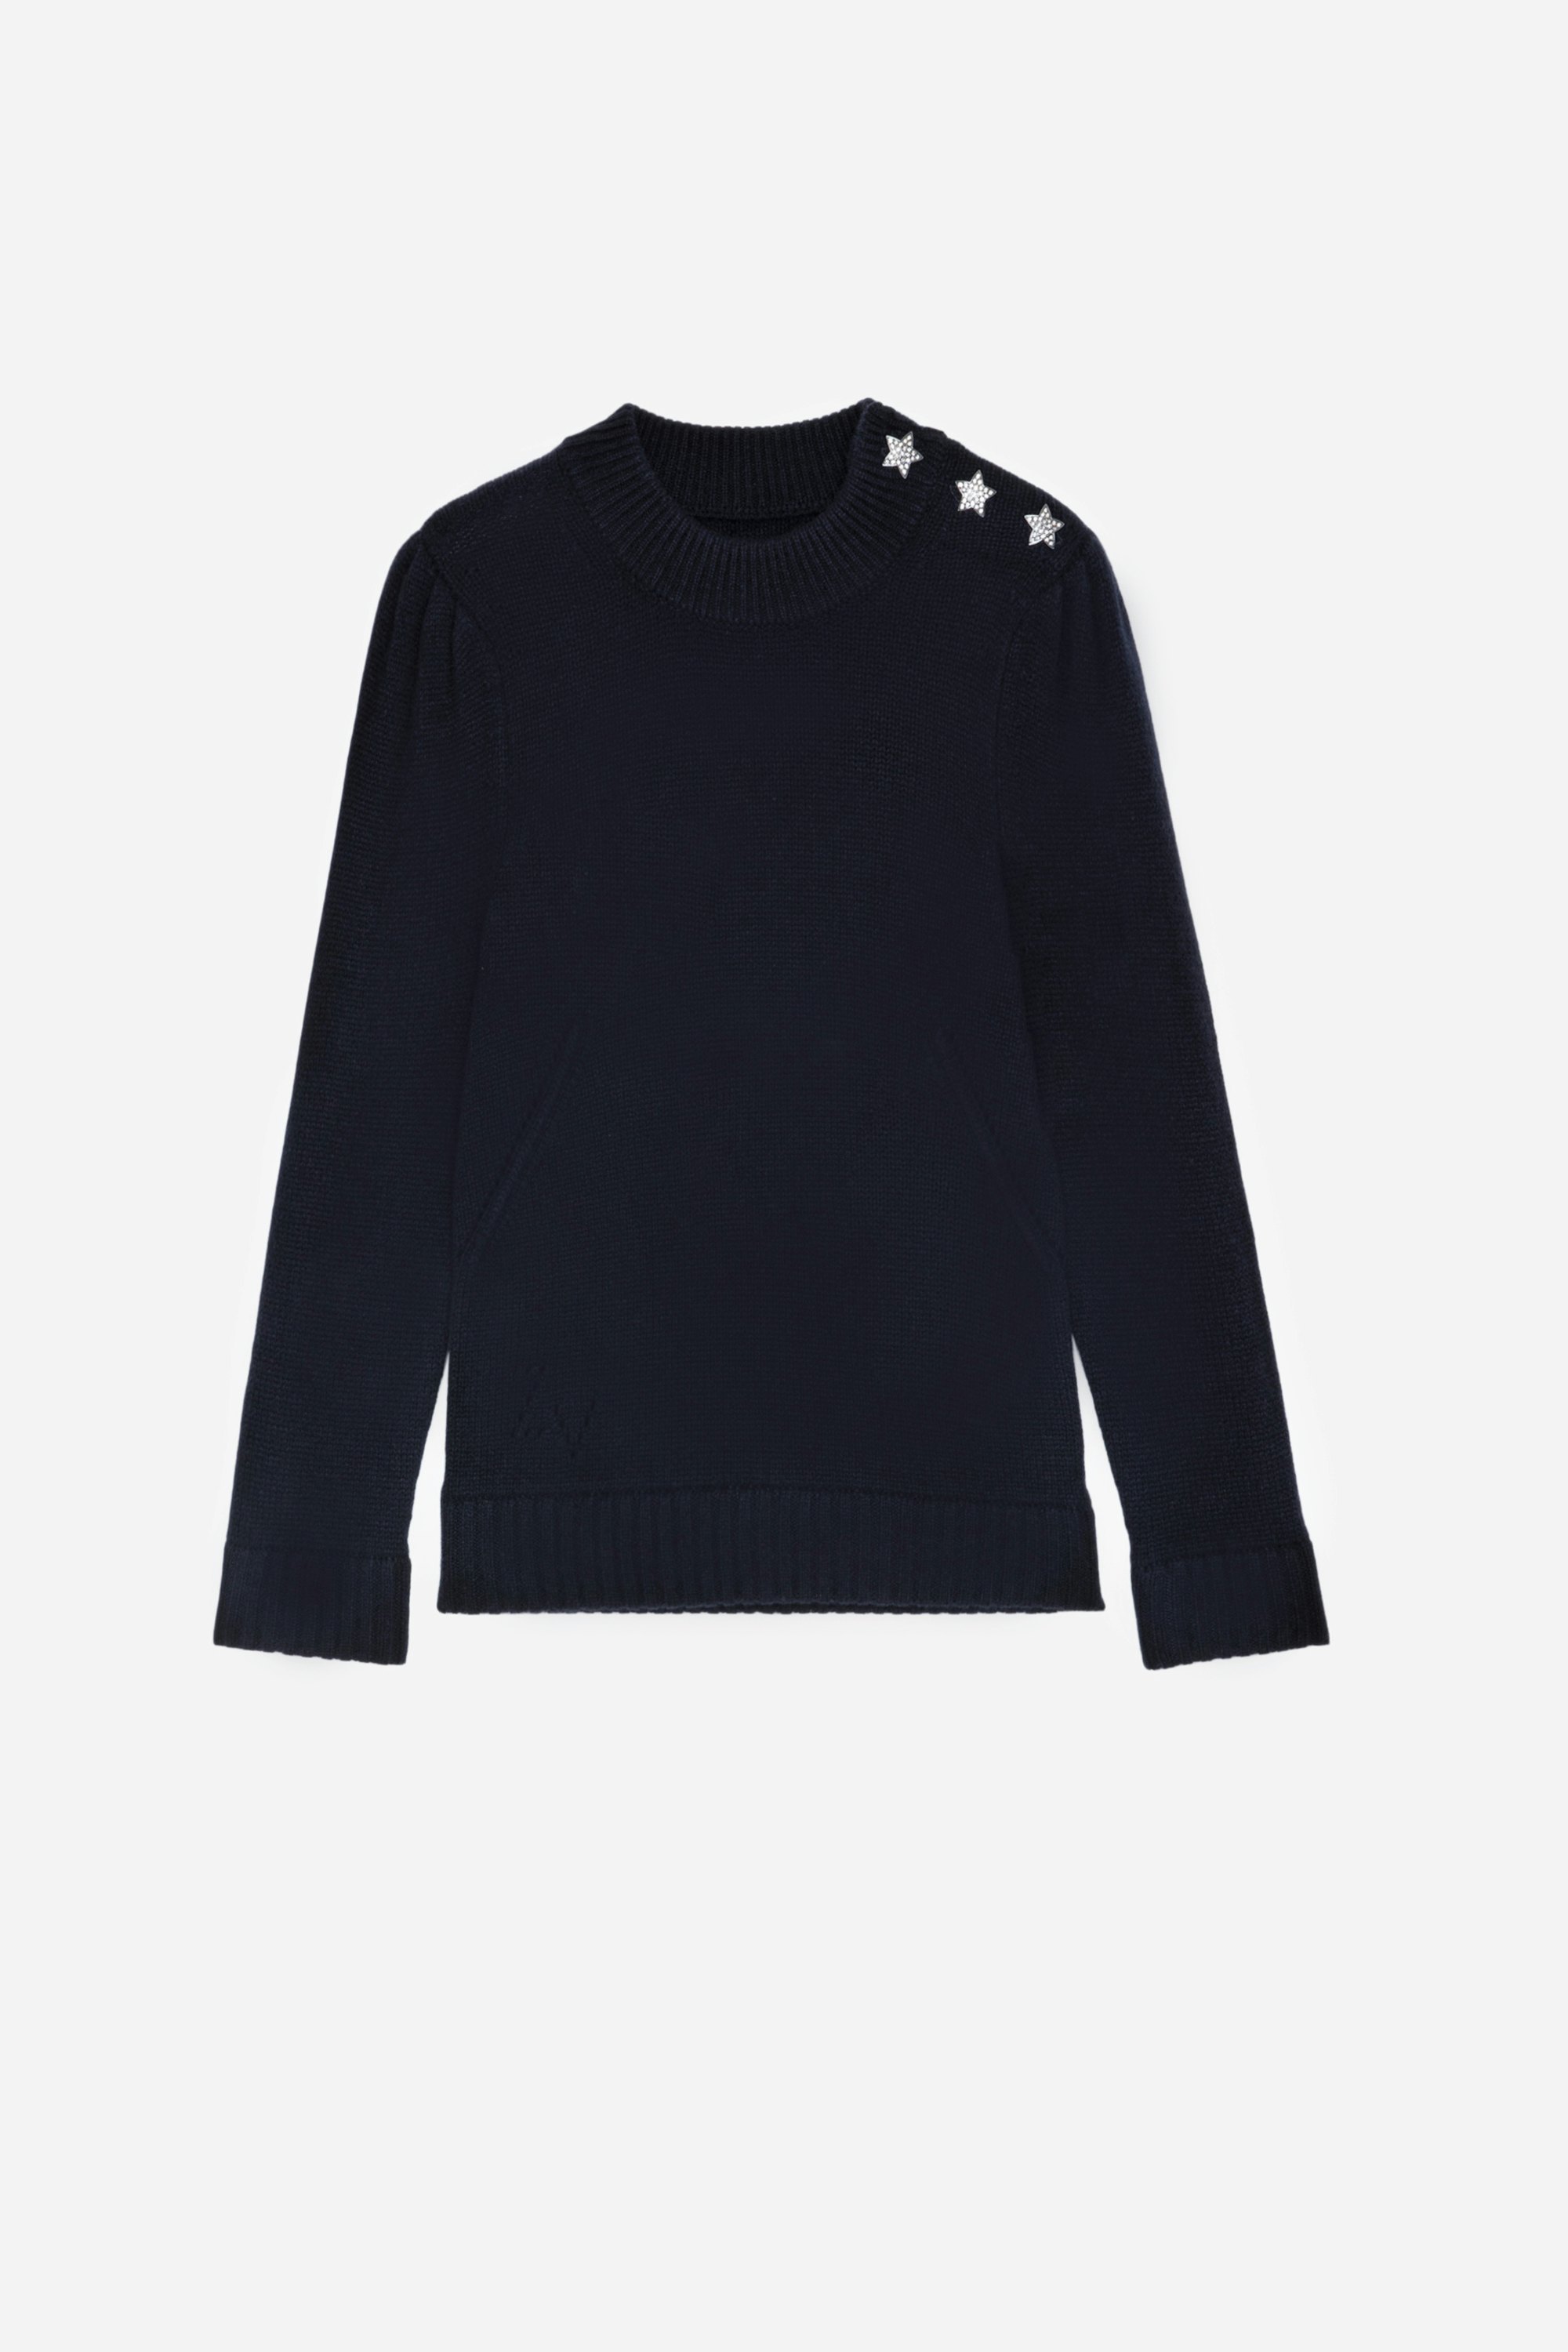 Betson Jewelled Cashmere Jumper Women's navy blue cashmere sweater with star-shaped jewelled buttons on the shoulders.